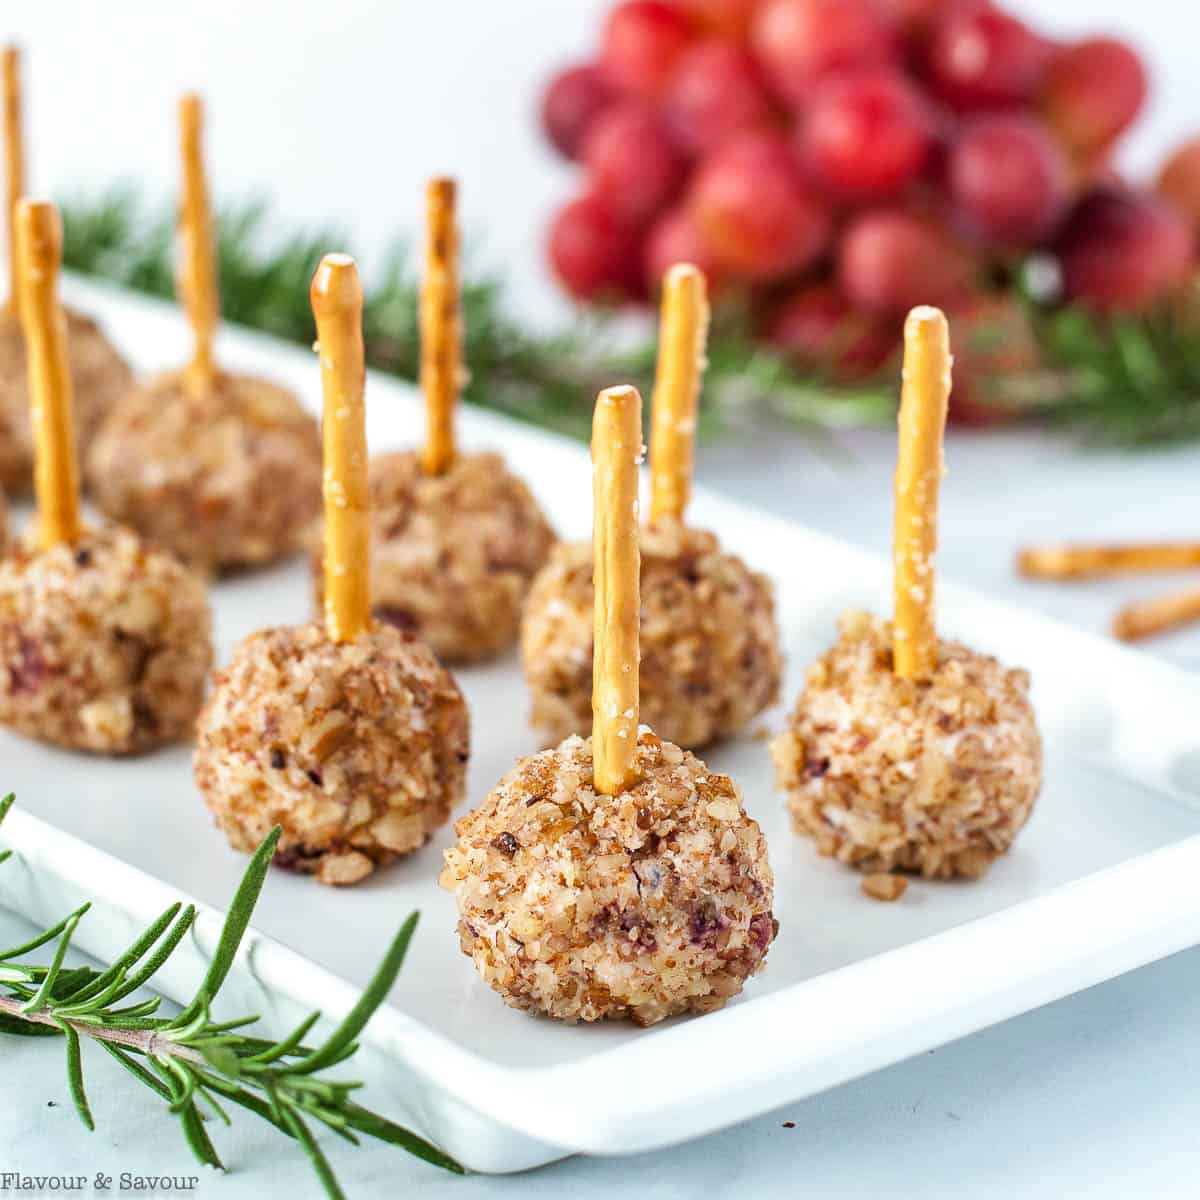 Finger Food Recipe Ideas for Your Next Party - Kroger